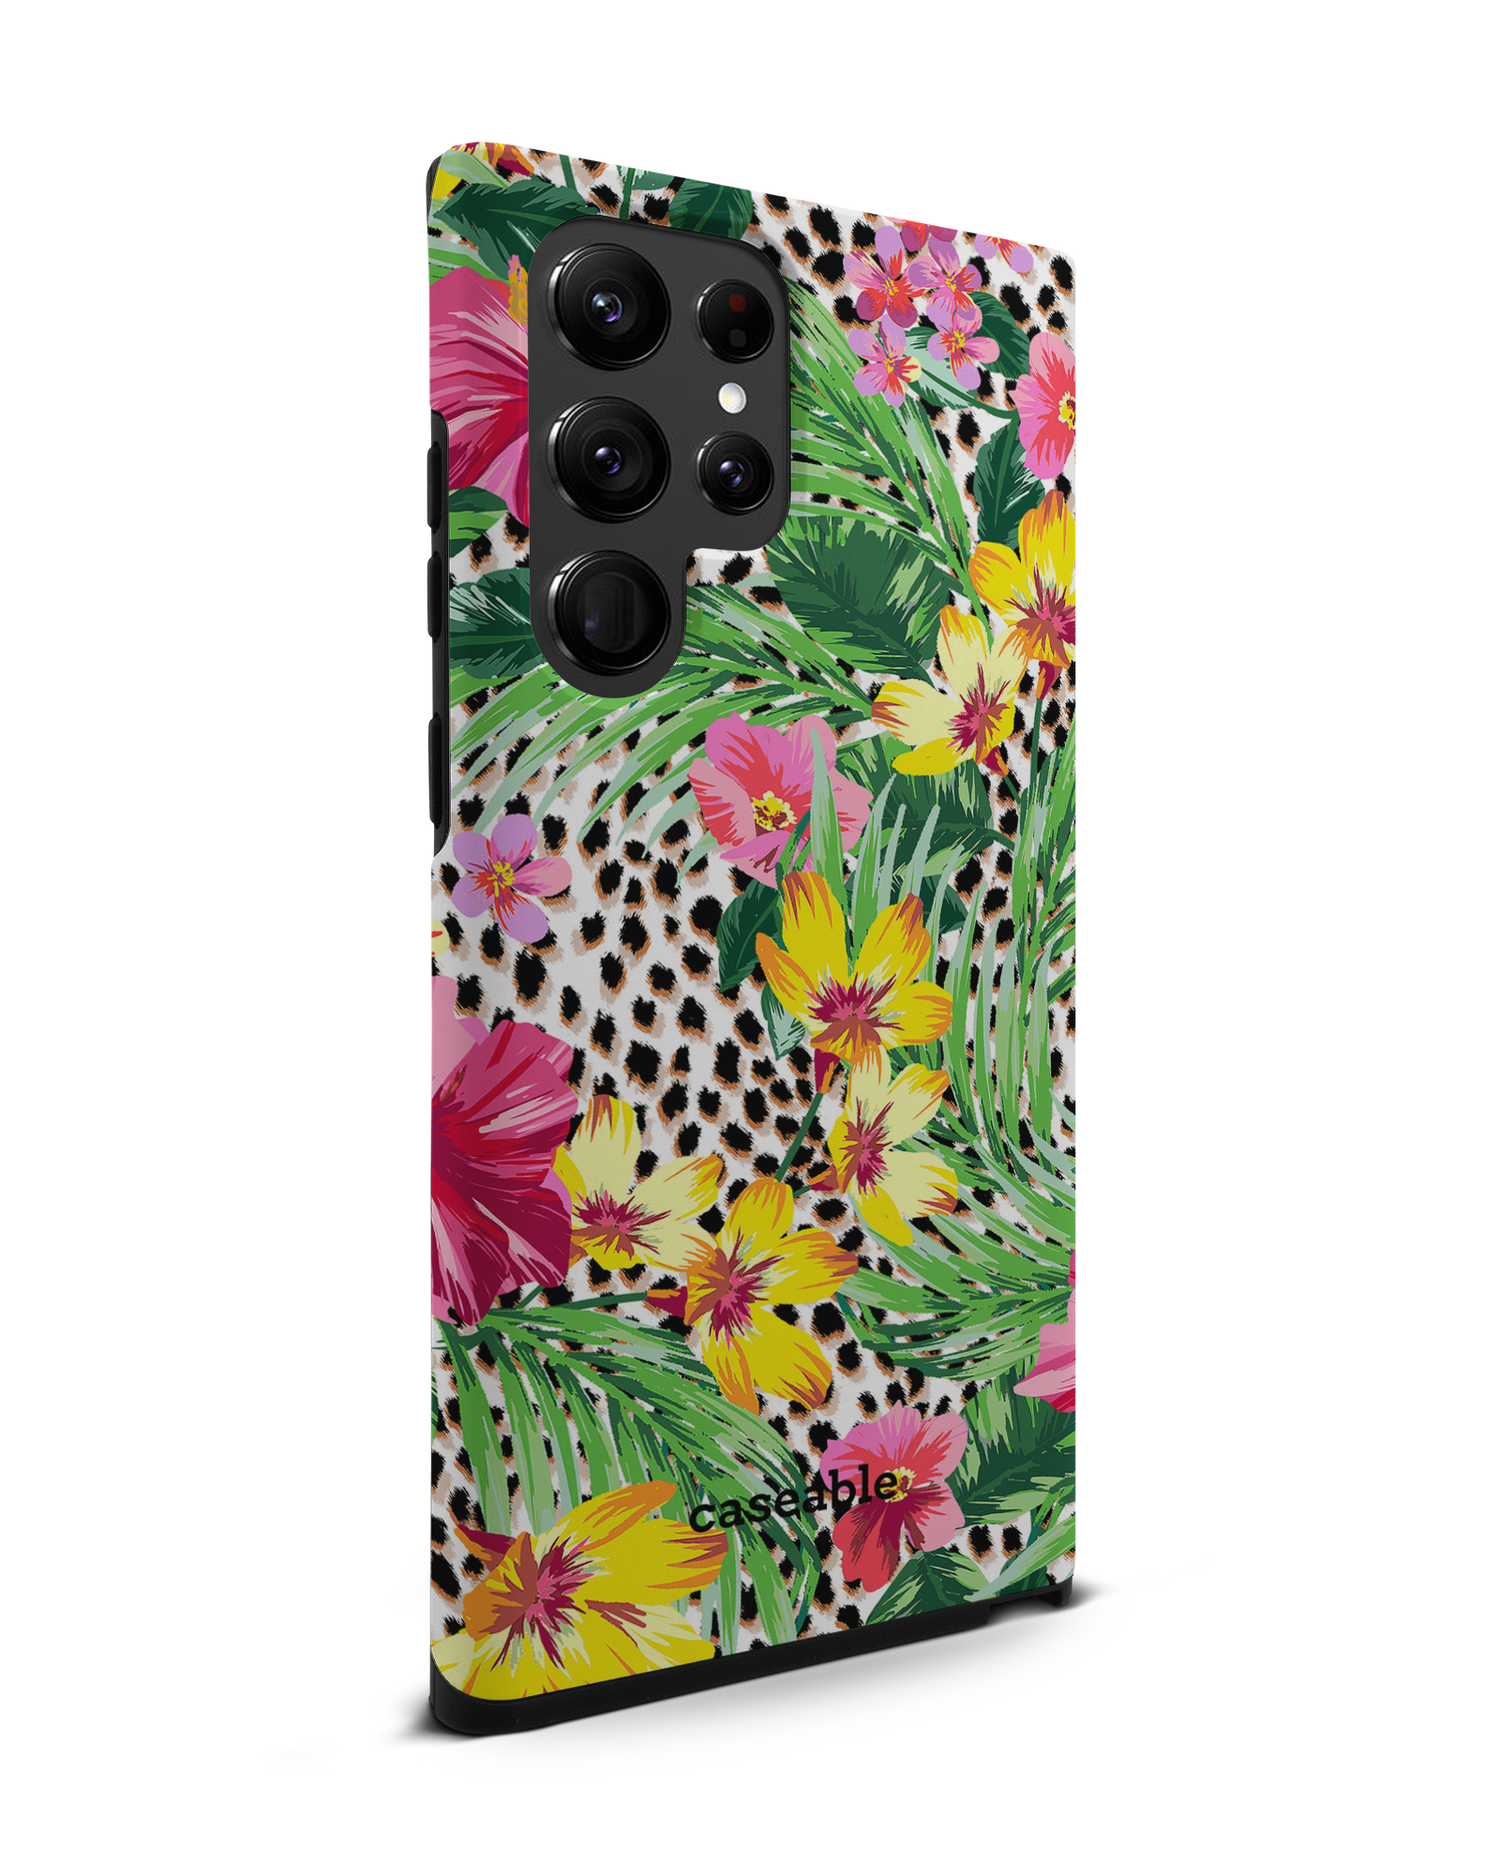 Tropical Cheetah Premium Phone Case Samsung Galaxy S22 Ultra 5G: View from the left side